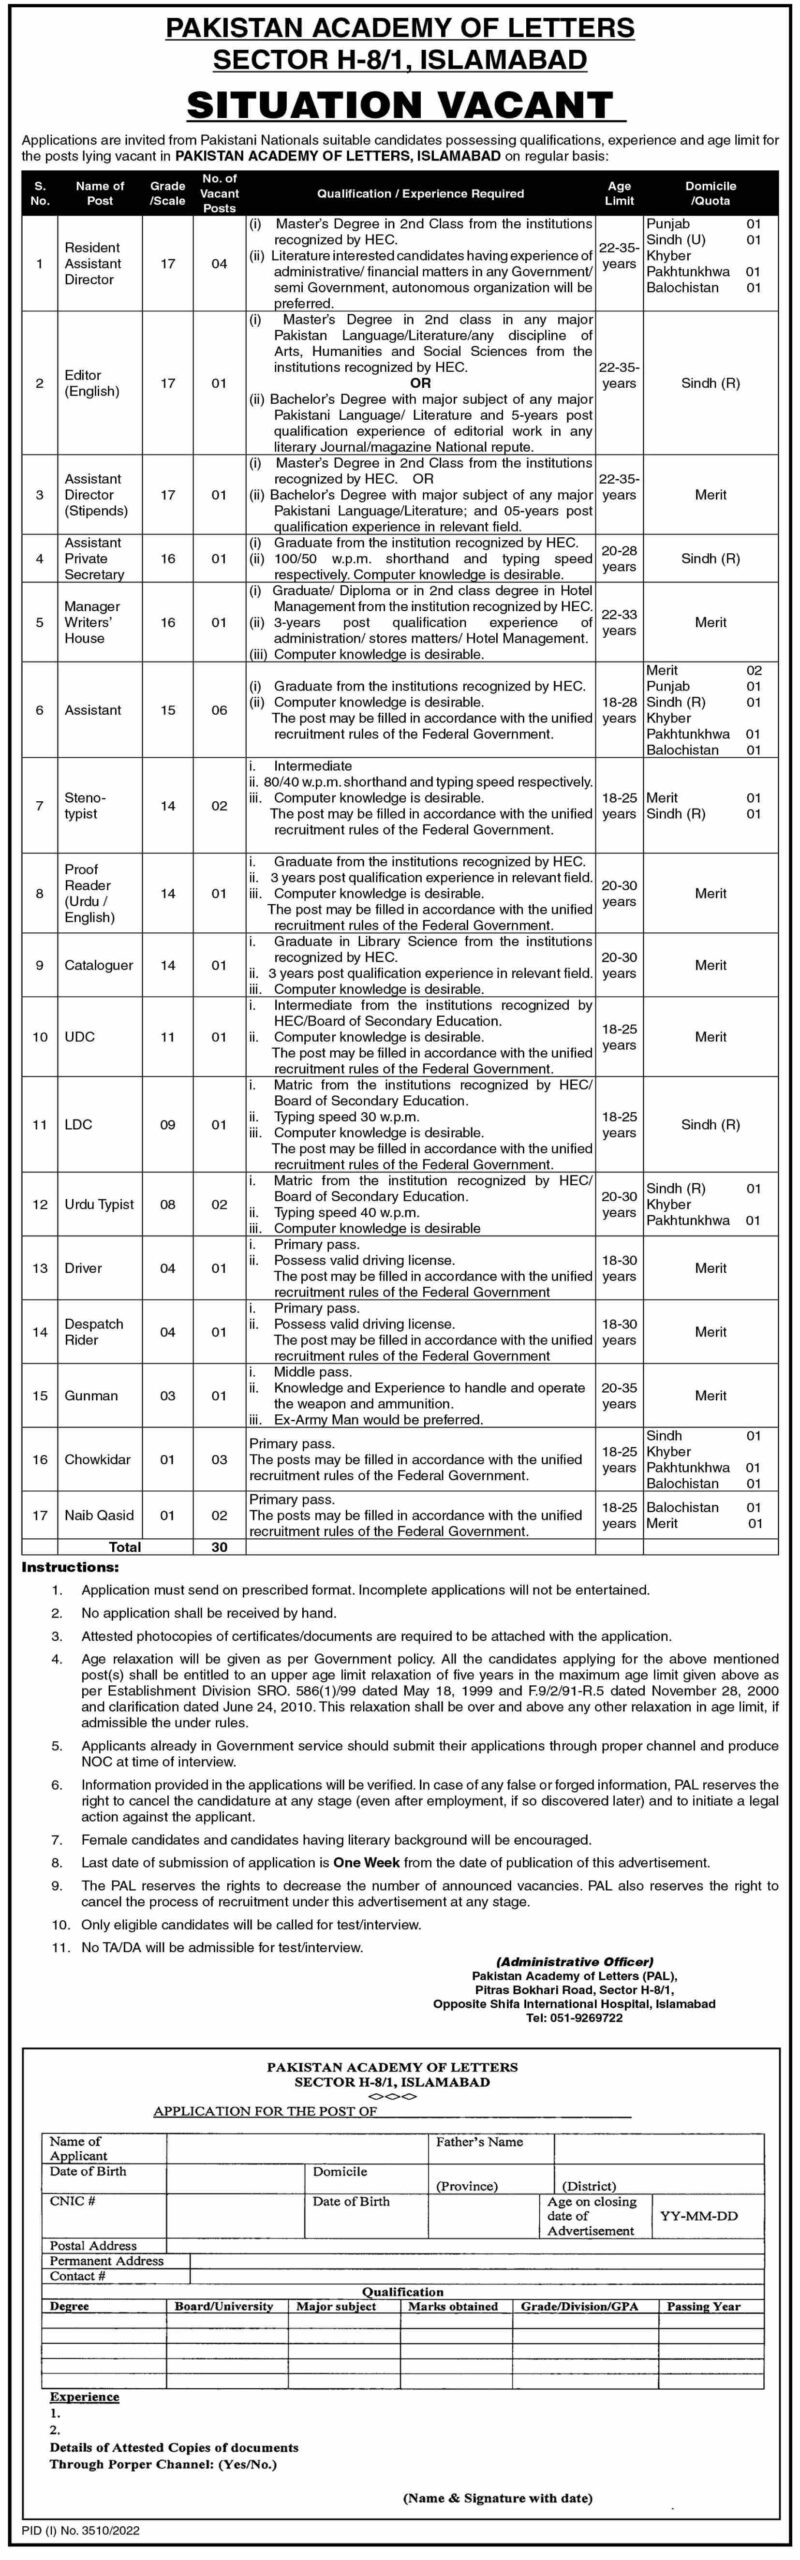 Pakistan Academy of Letters (PAL) Islamabad Jobs 2022